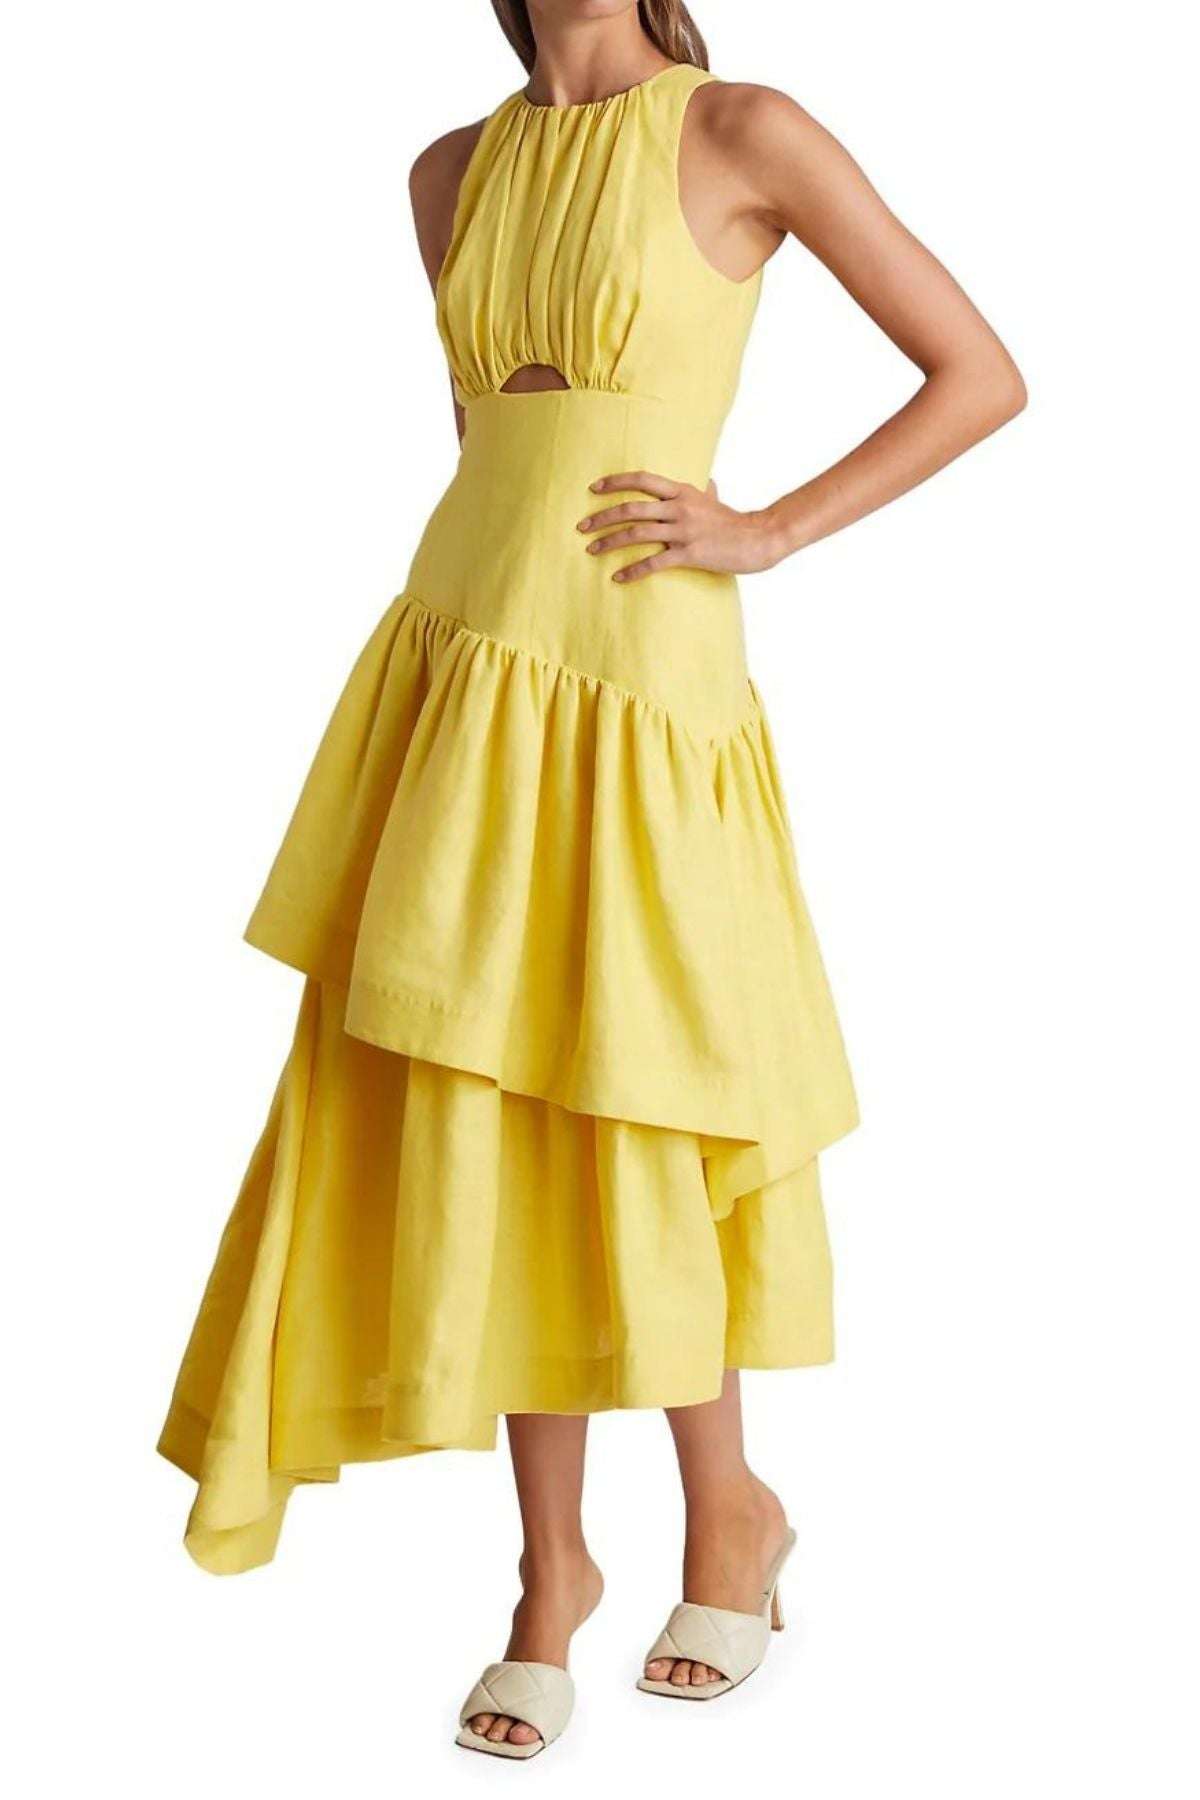 Aje AJE Caliente Tiered Cut Out Dress (Daisy Yellow) - RRP $575 - aje-caliente-tiered-cut-out-dress-daisy-yellow---rrp-5-dress-for-a-night-30753645.jpg